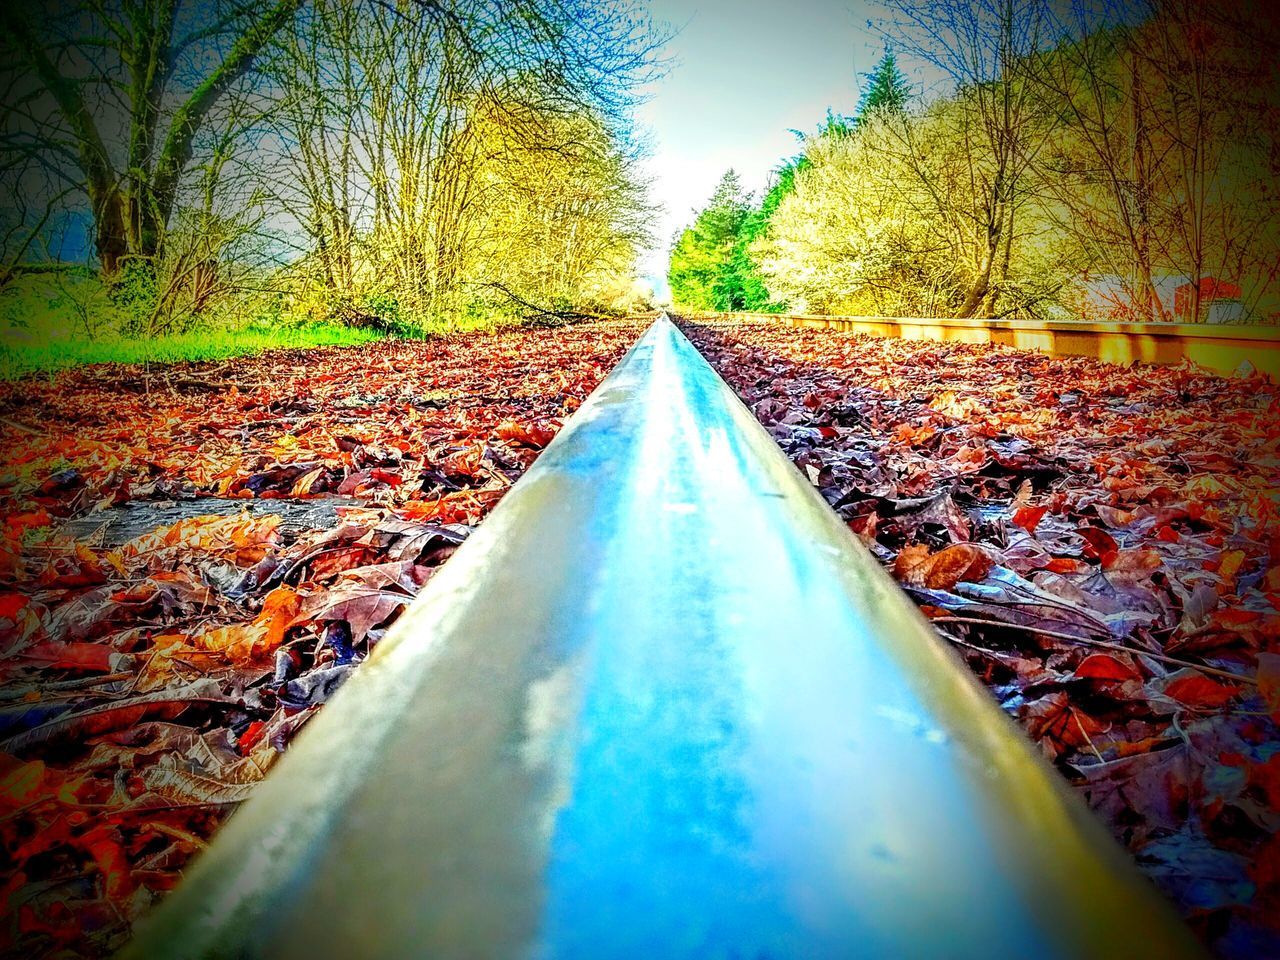 SURFACE LEVEL OF RAILROAD TRACK ALONG TREES